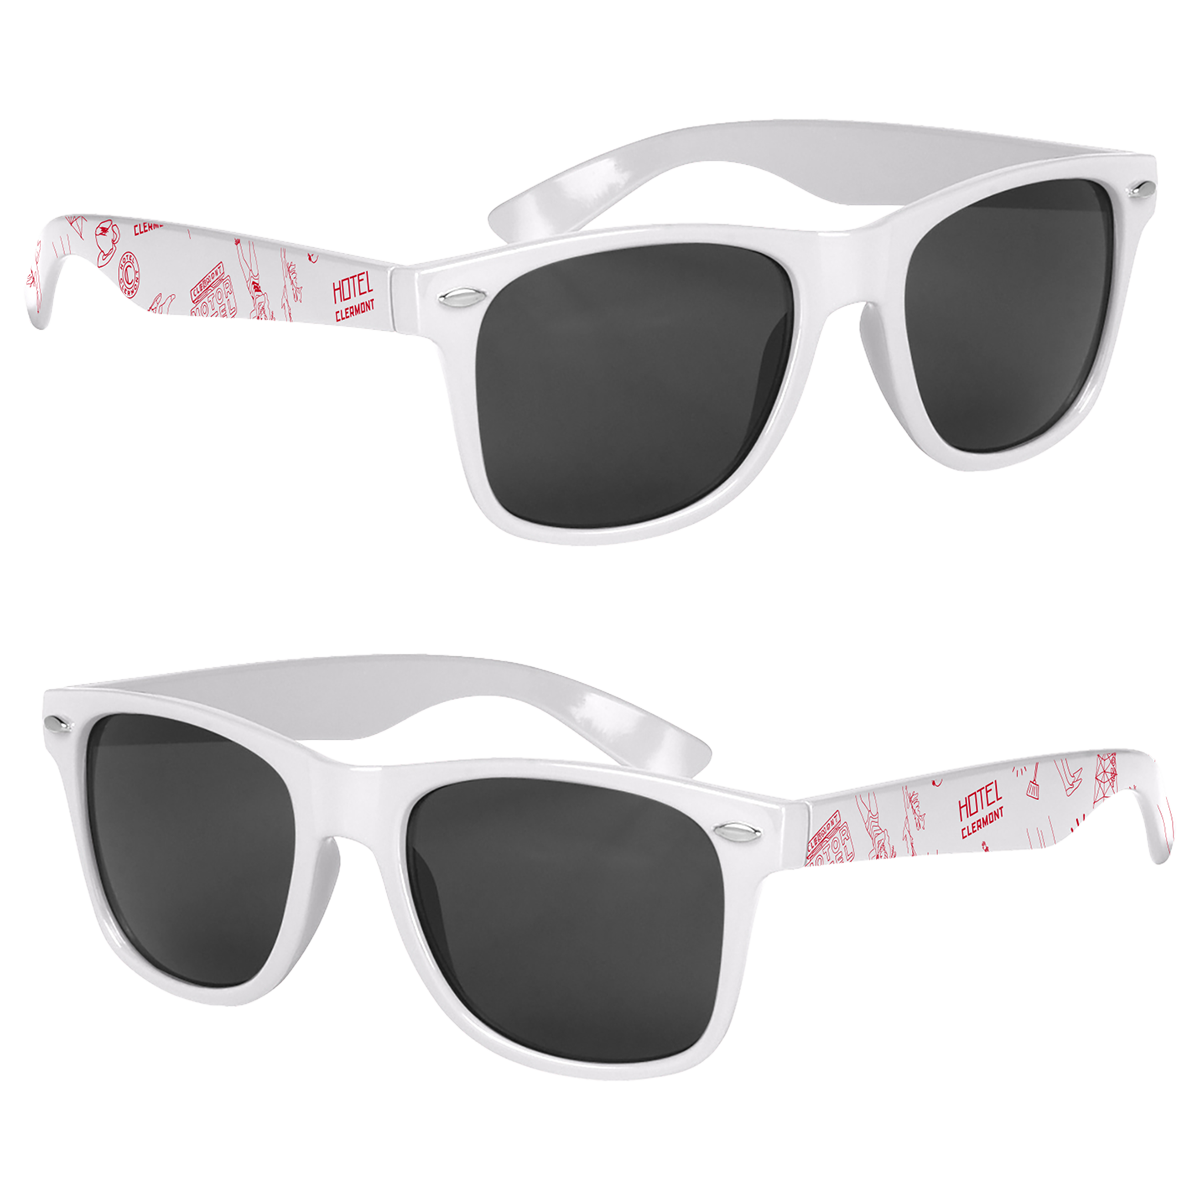 Hotel Clermont Sunglasses